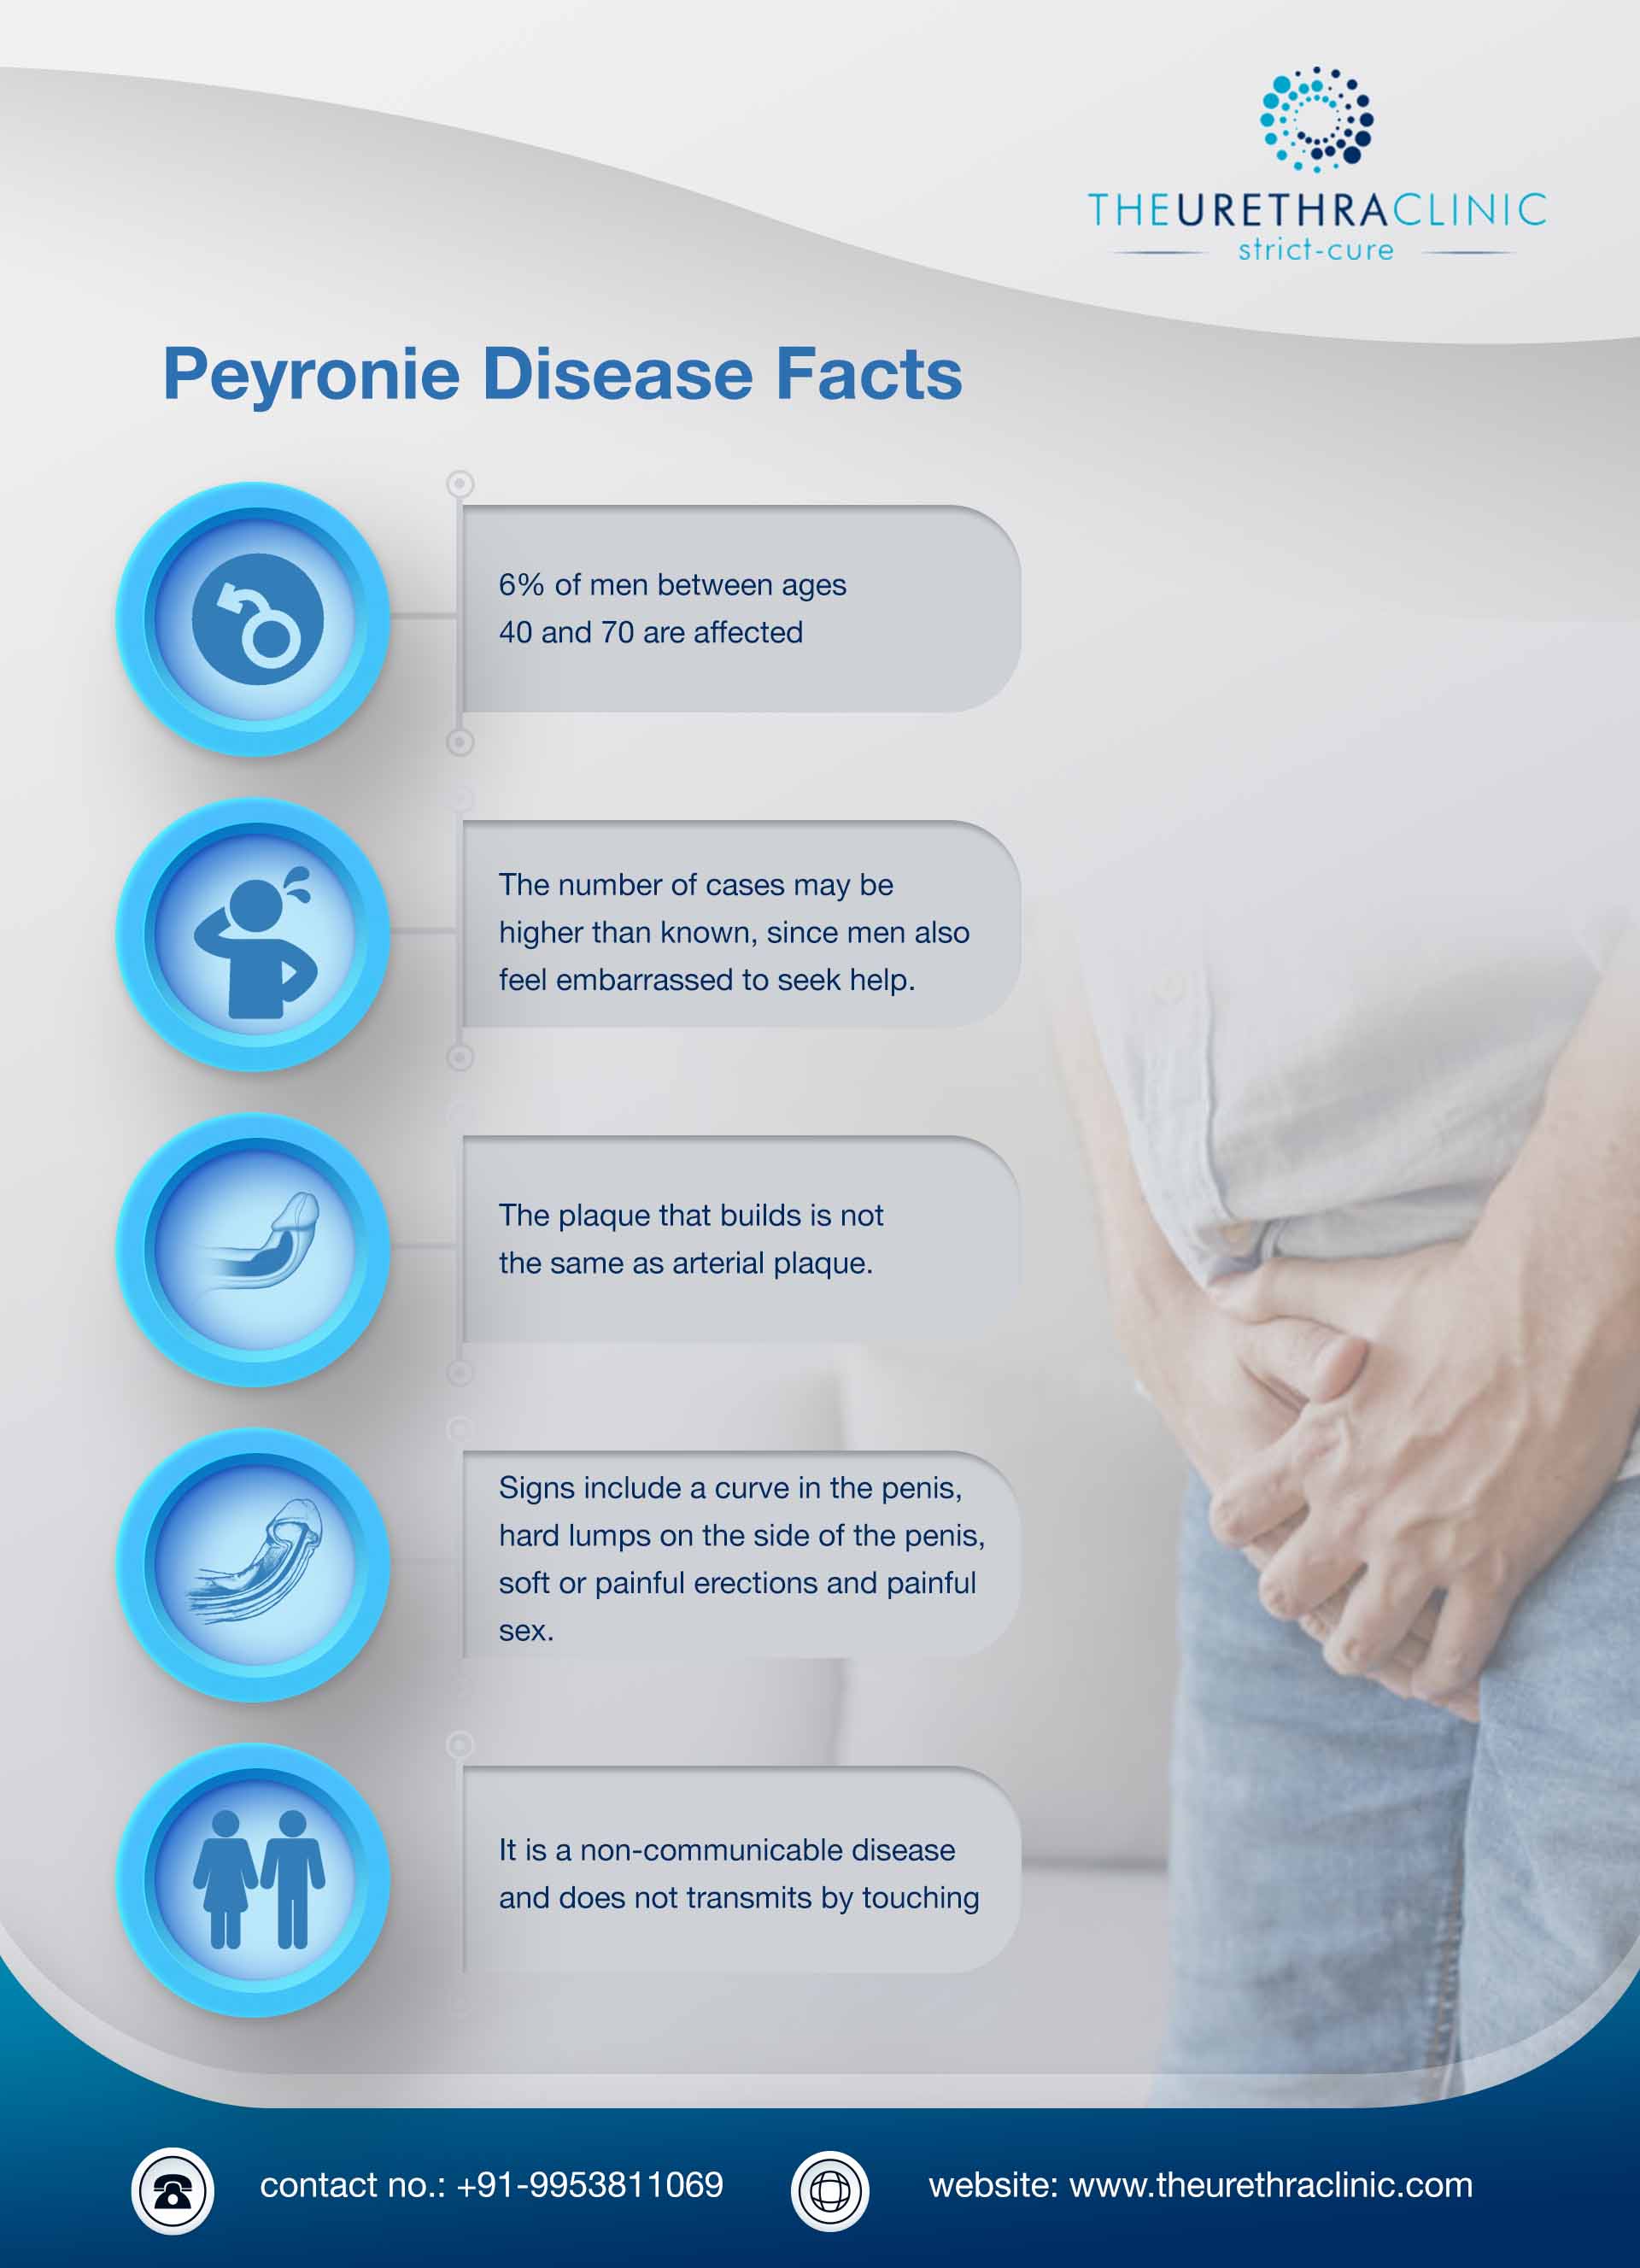 Everything You Need To Know About Peyronie's Disease? The Urethra Clinic